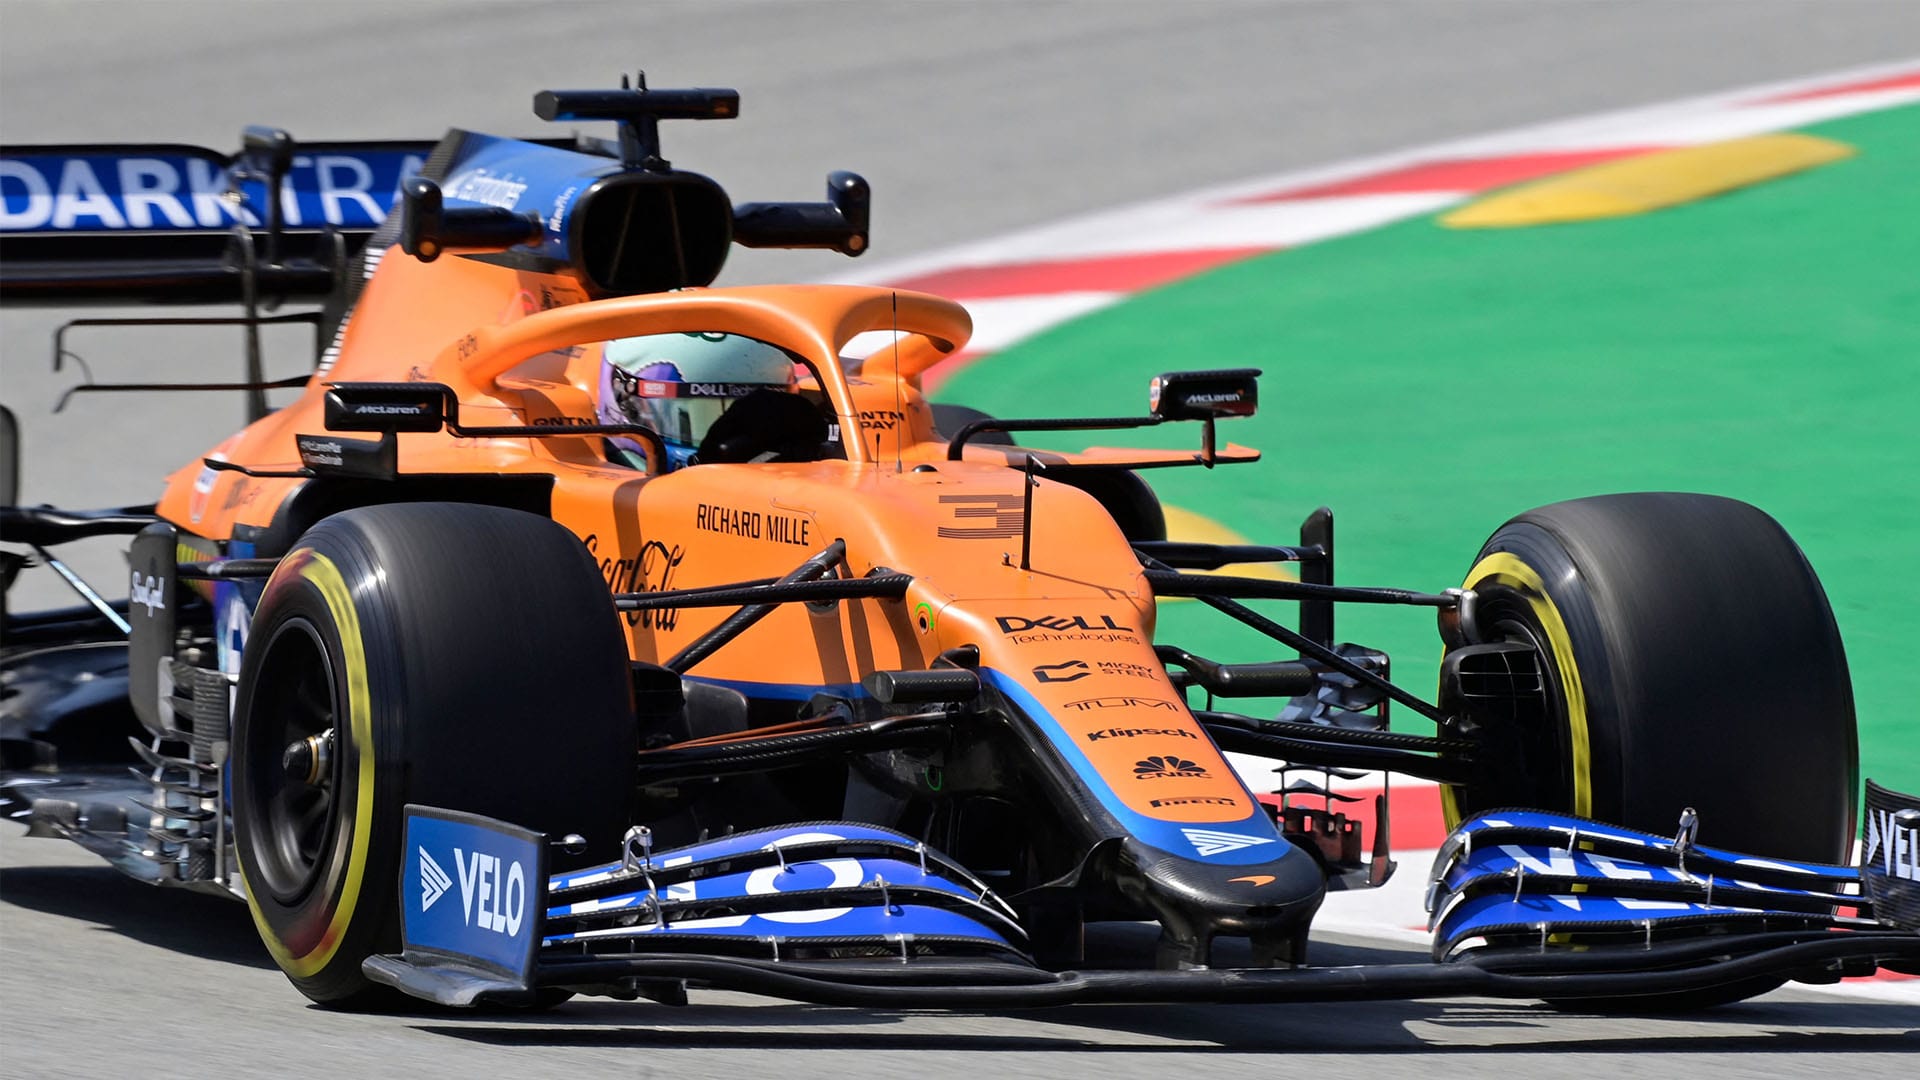 Mclaren Duo Confident Of Finding Pace In Qualifying After Trialling Car Upgrades In Friday Practice Formula 1